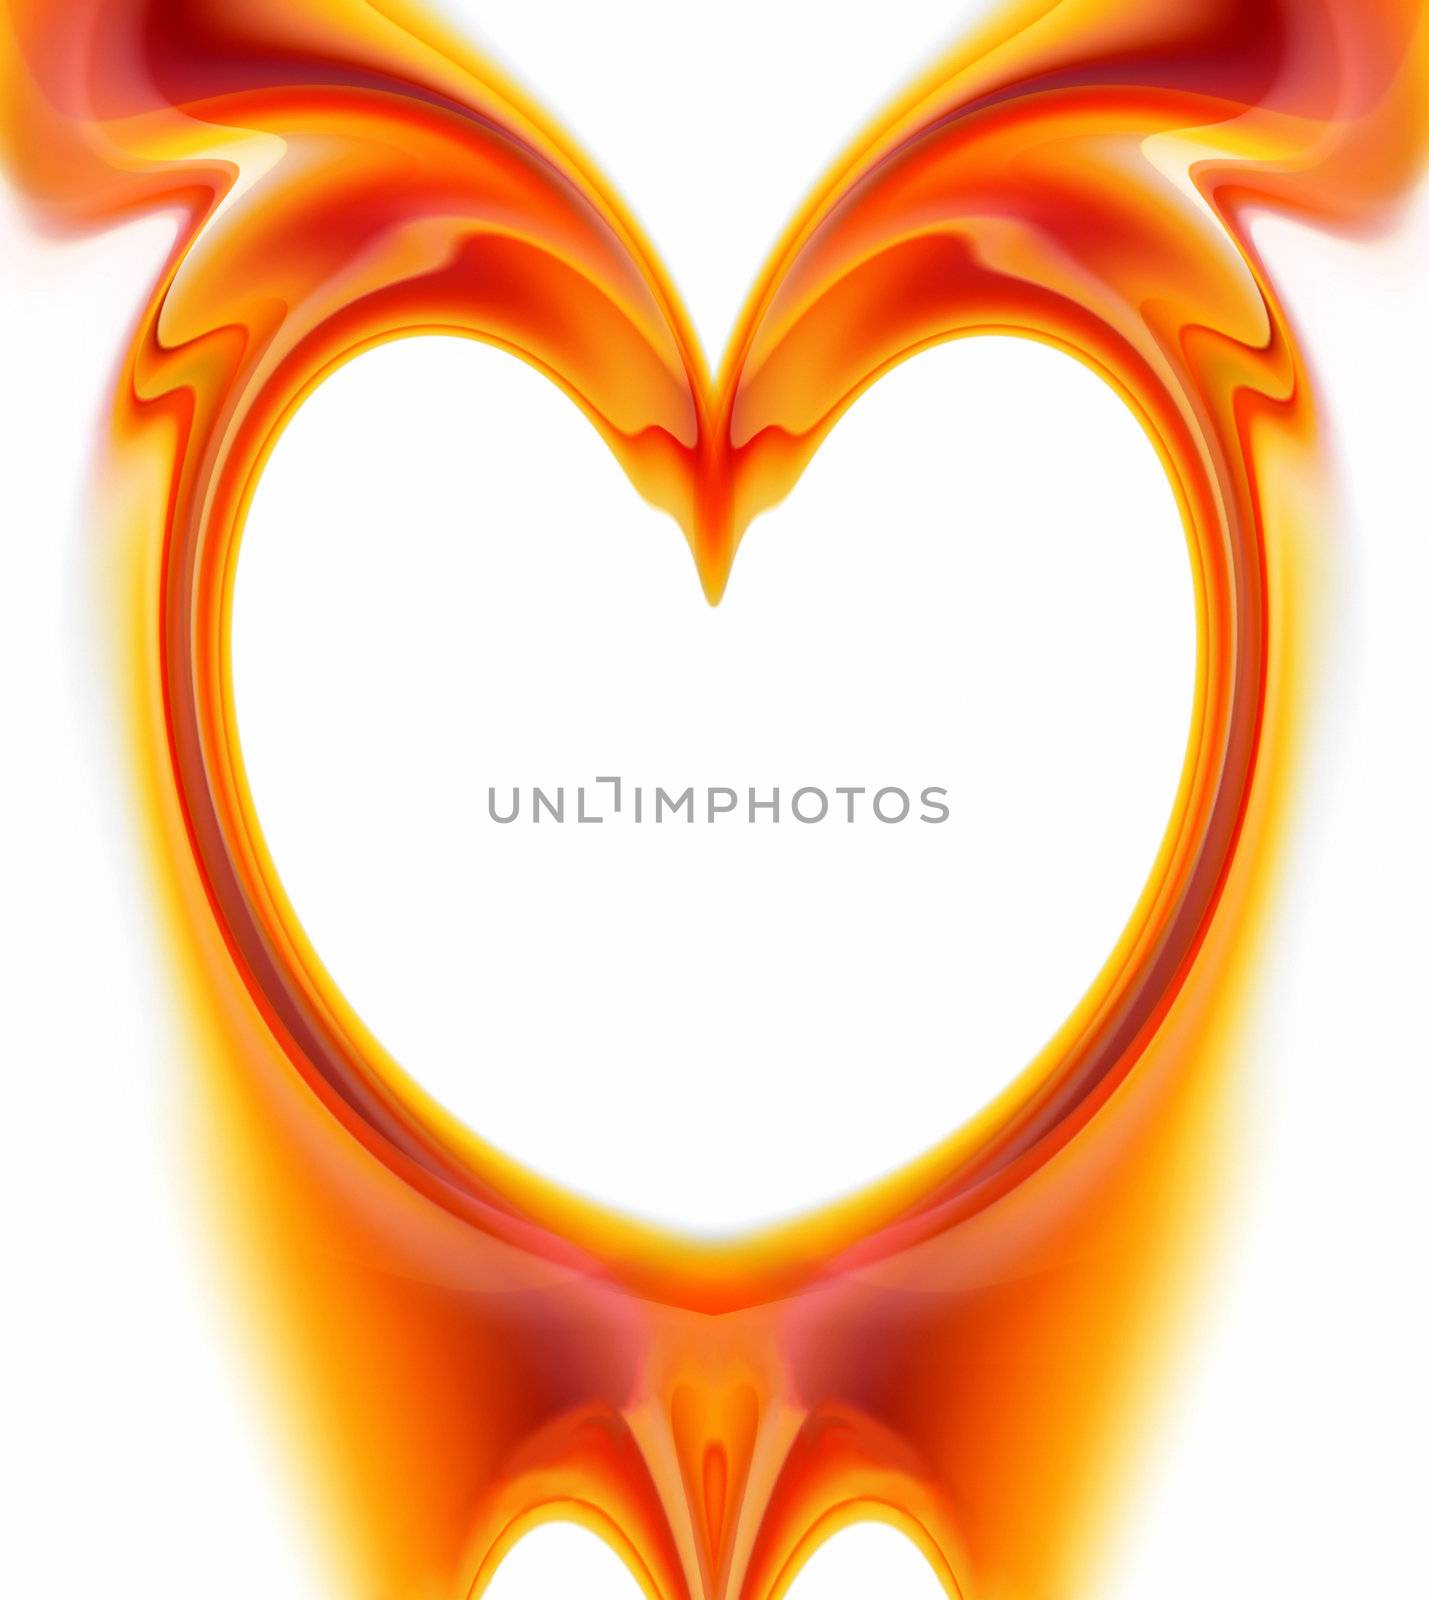 An image of a nice abstract heart frame background